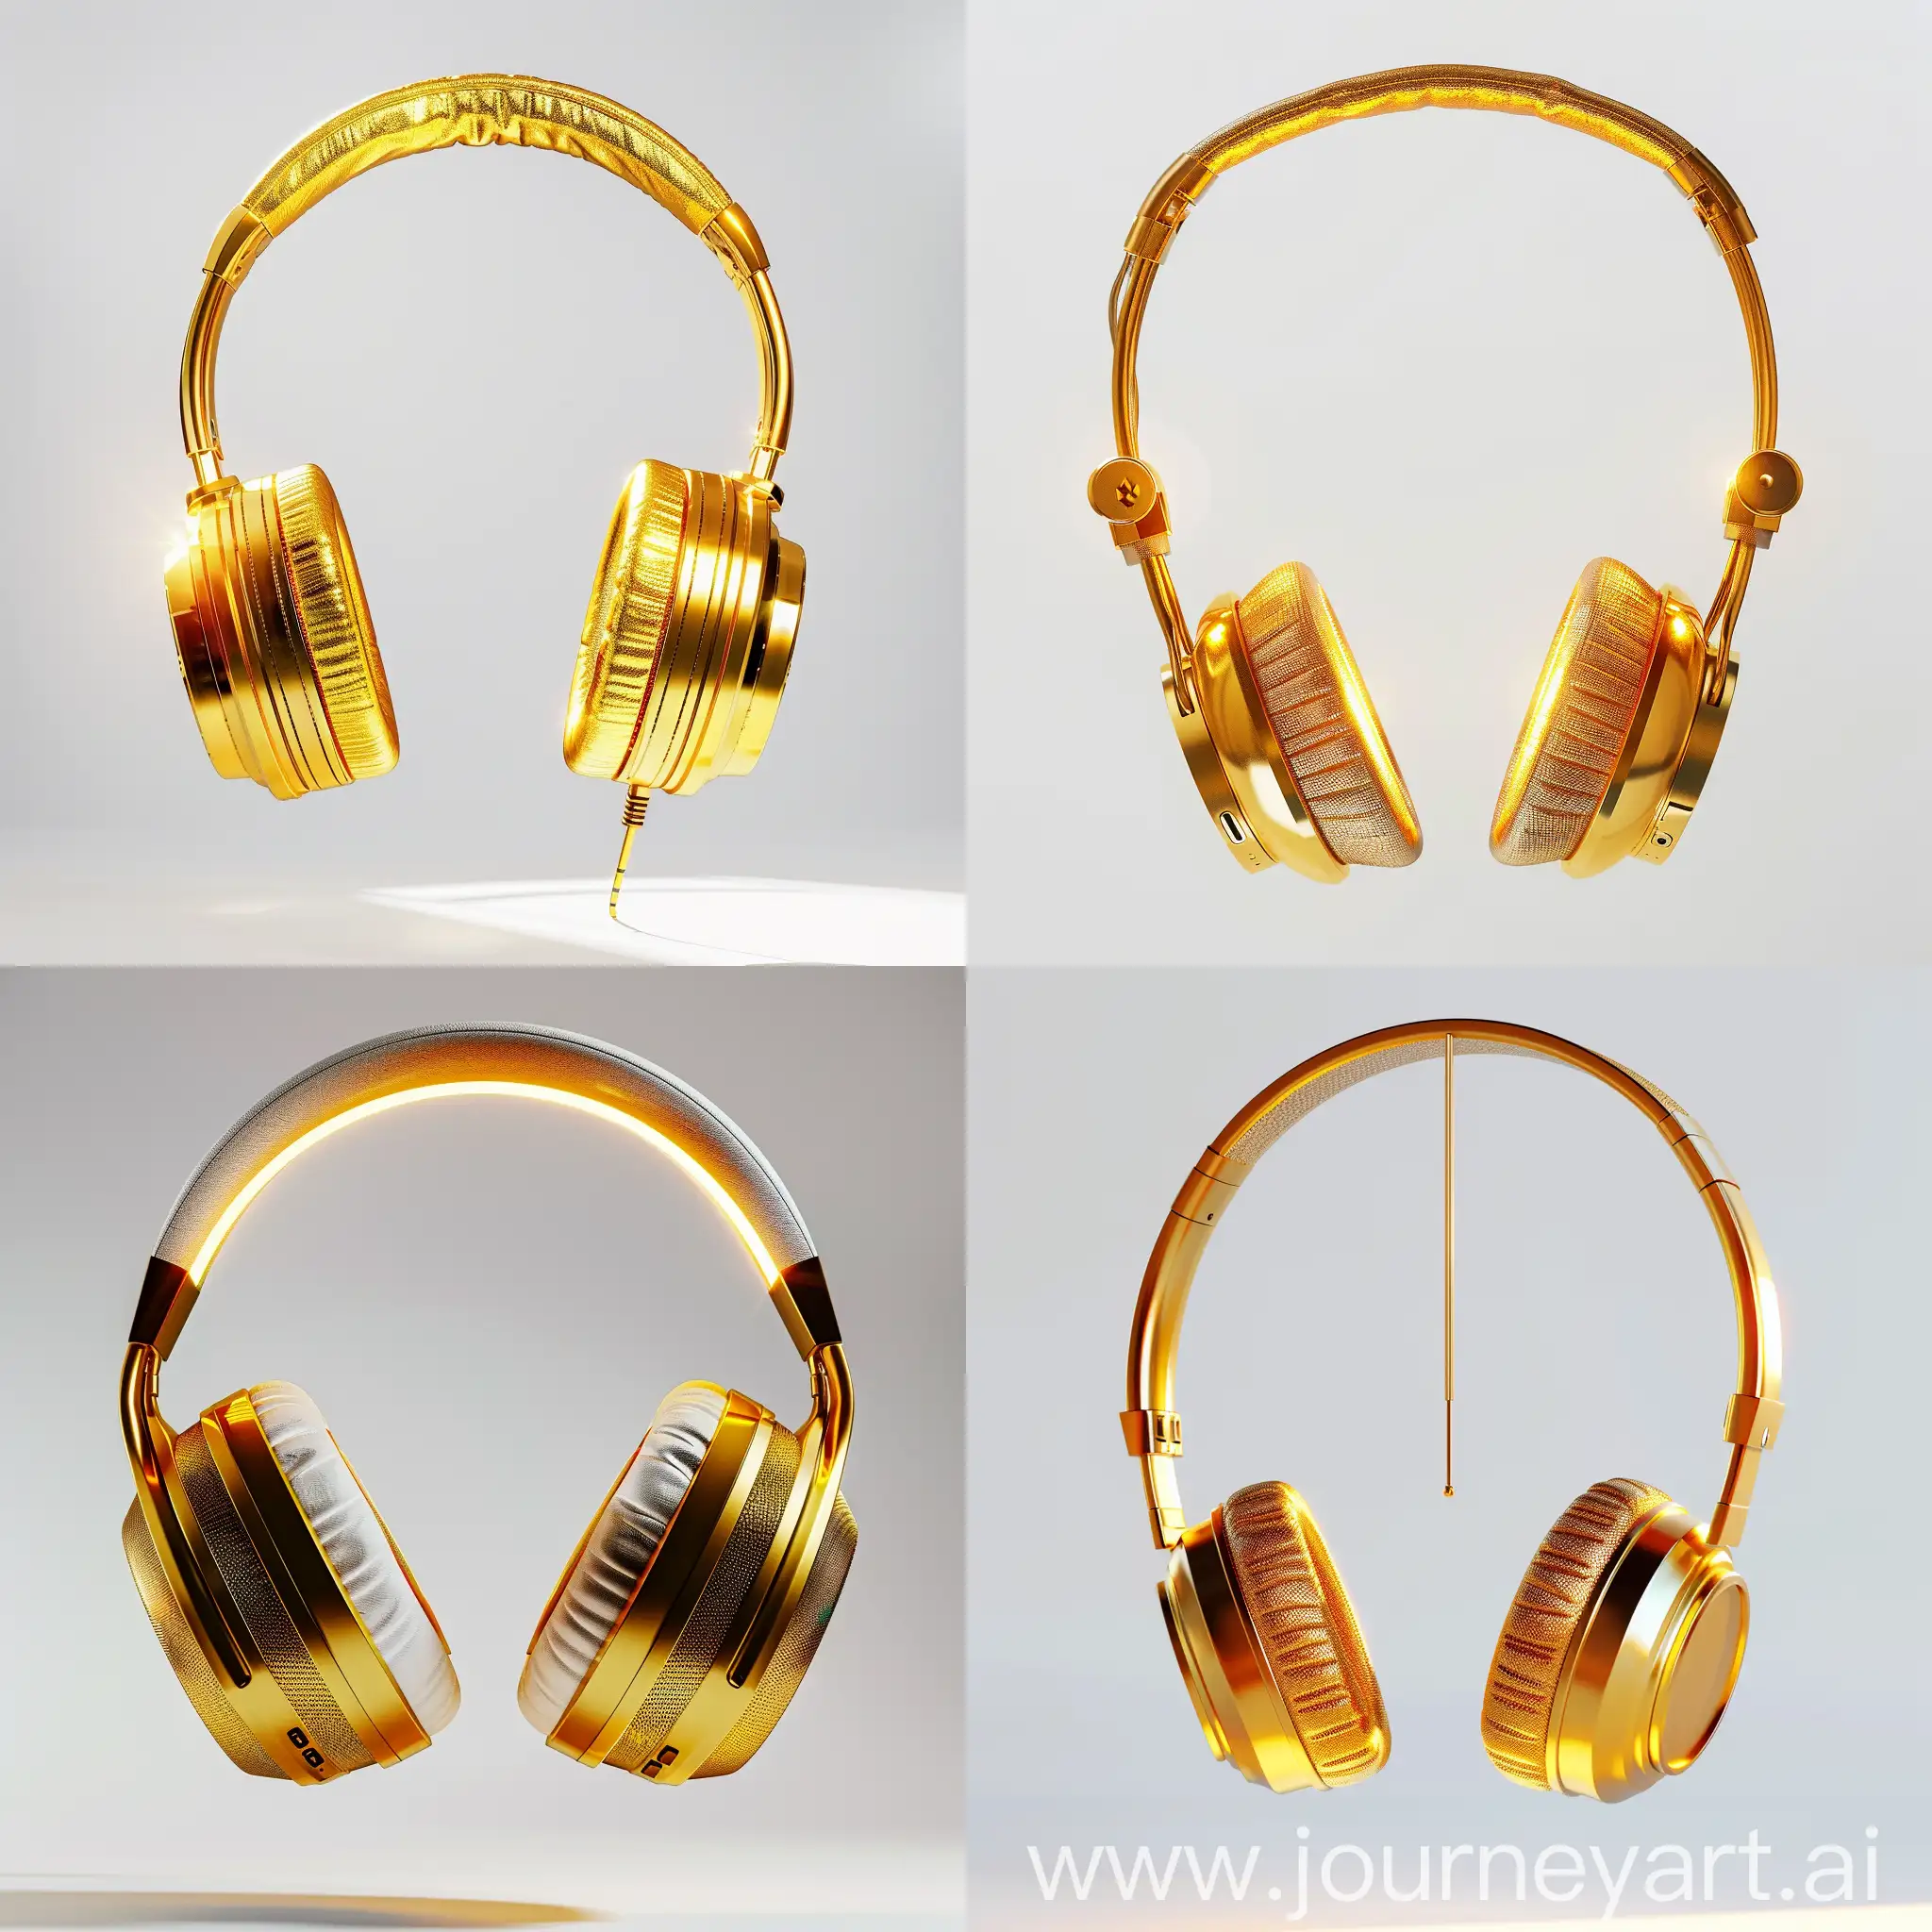 Golden-Microphone-Headphones-with-Ethereal-Light-Effect